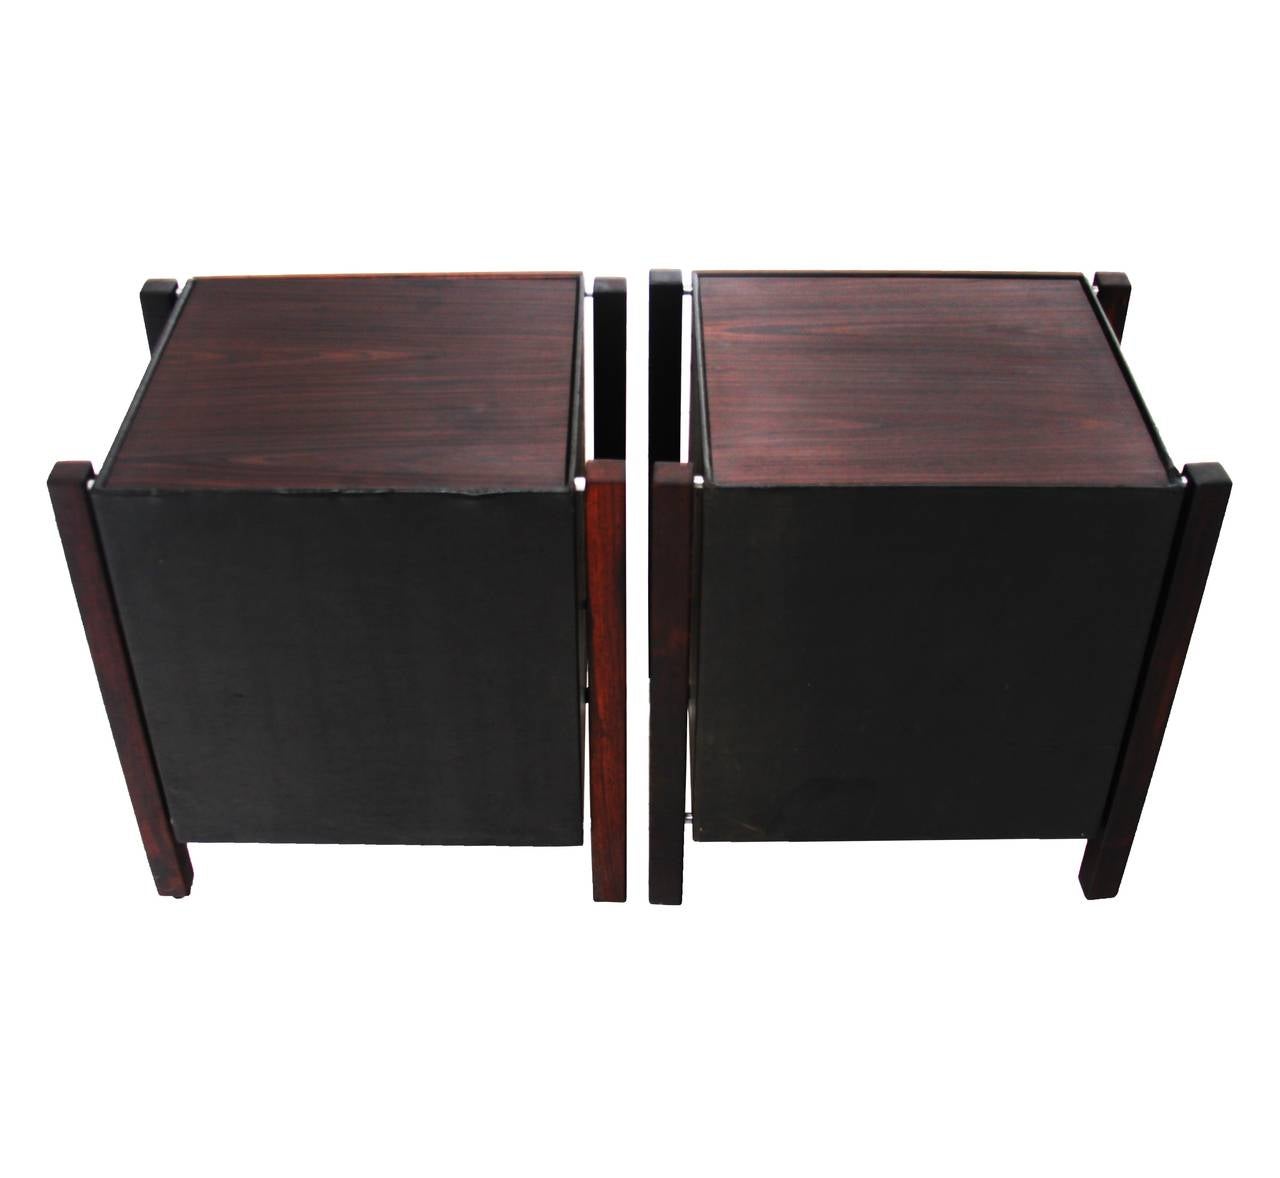 A pair of side tables designed by Brazil's Jorge Zalszupin with solid Rosewood uprights, solid Rosewood drawer fronts, Rosewood tops, original black leather wrapped cases, and chrome pulls.

Many pieces are stored in our warehouse, so please click